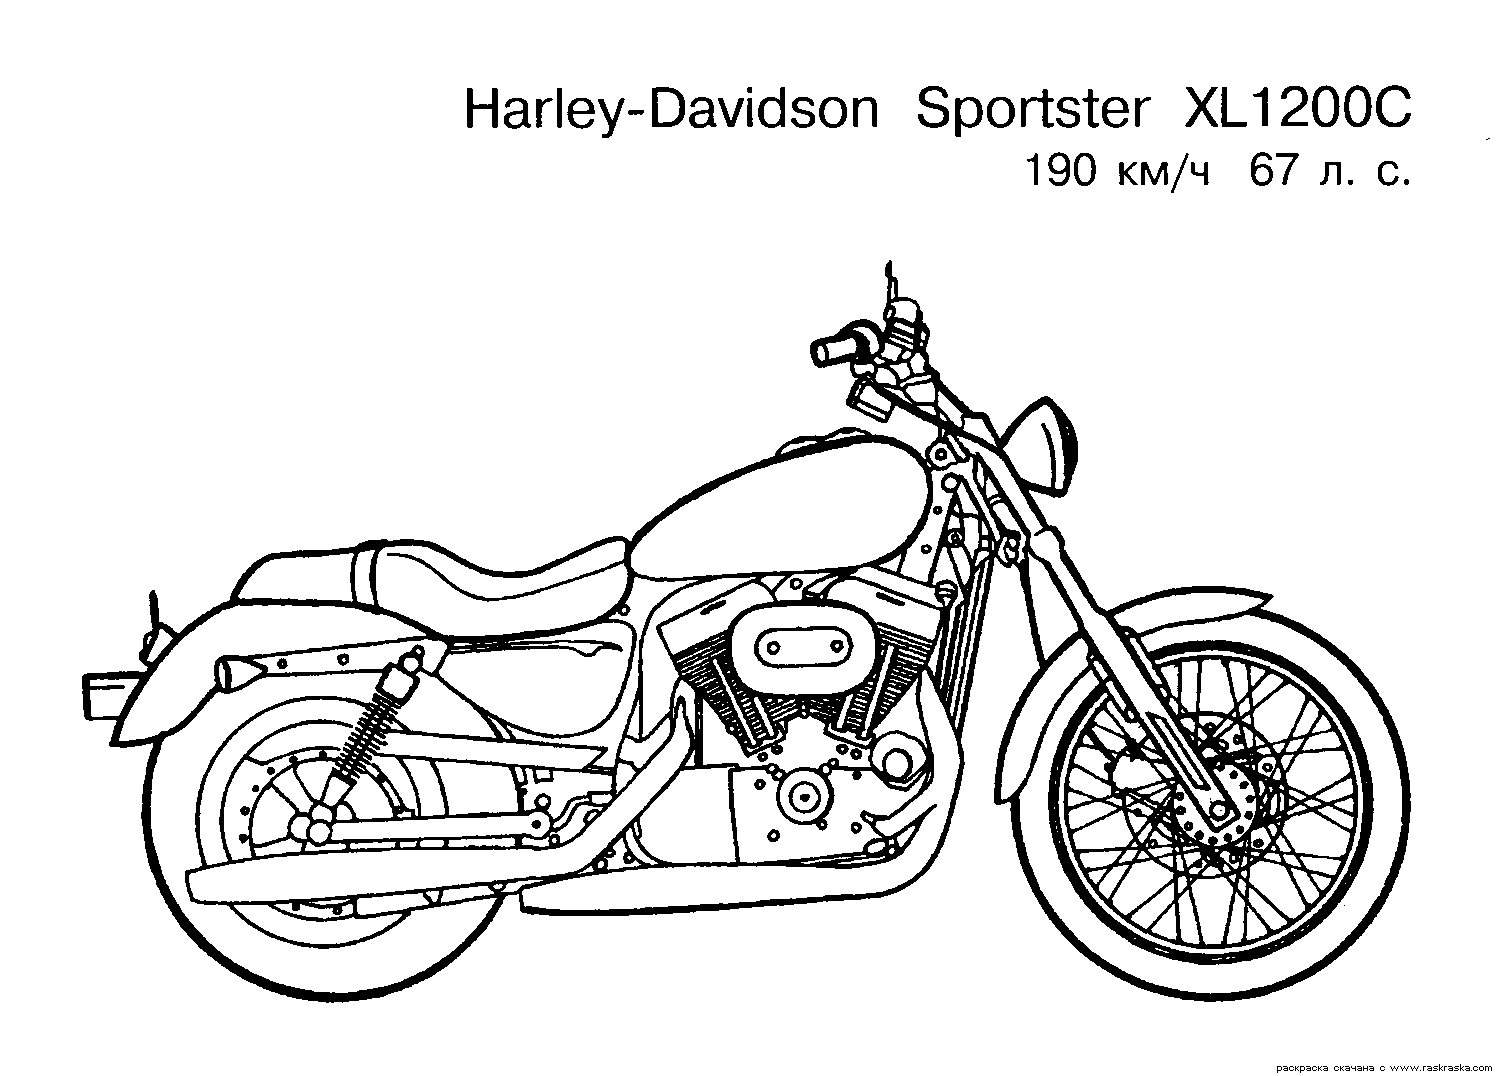  Free Motorcycle coloring page, letscoloringpages.com, Harley Davidson Sportster XL 1200C